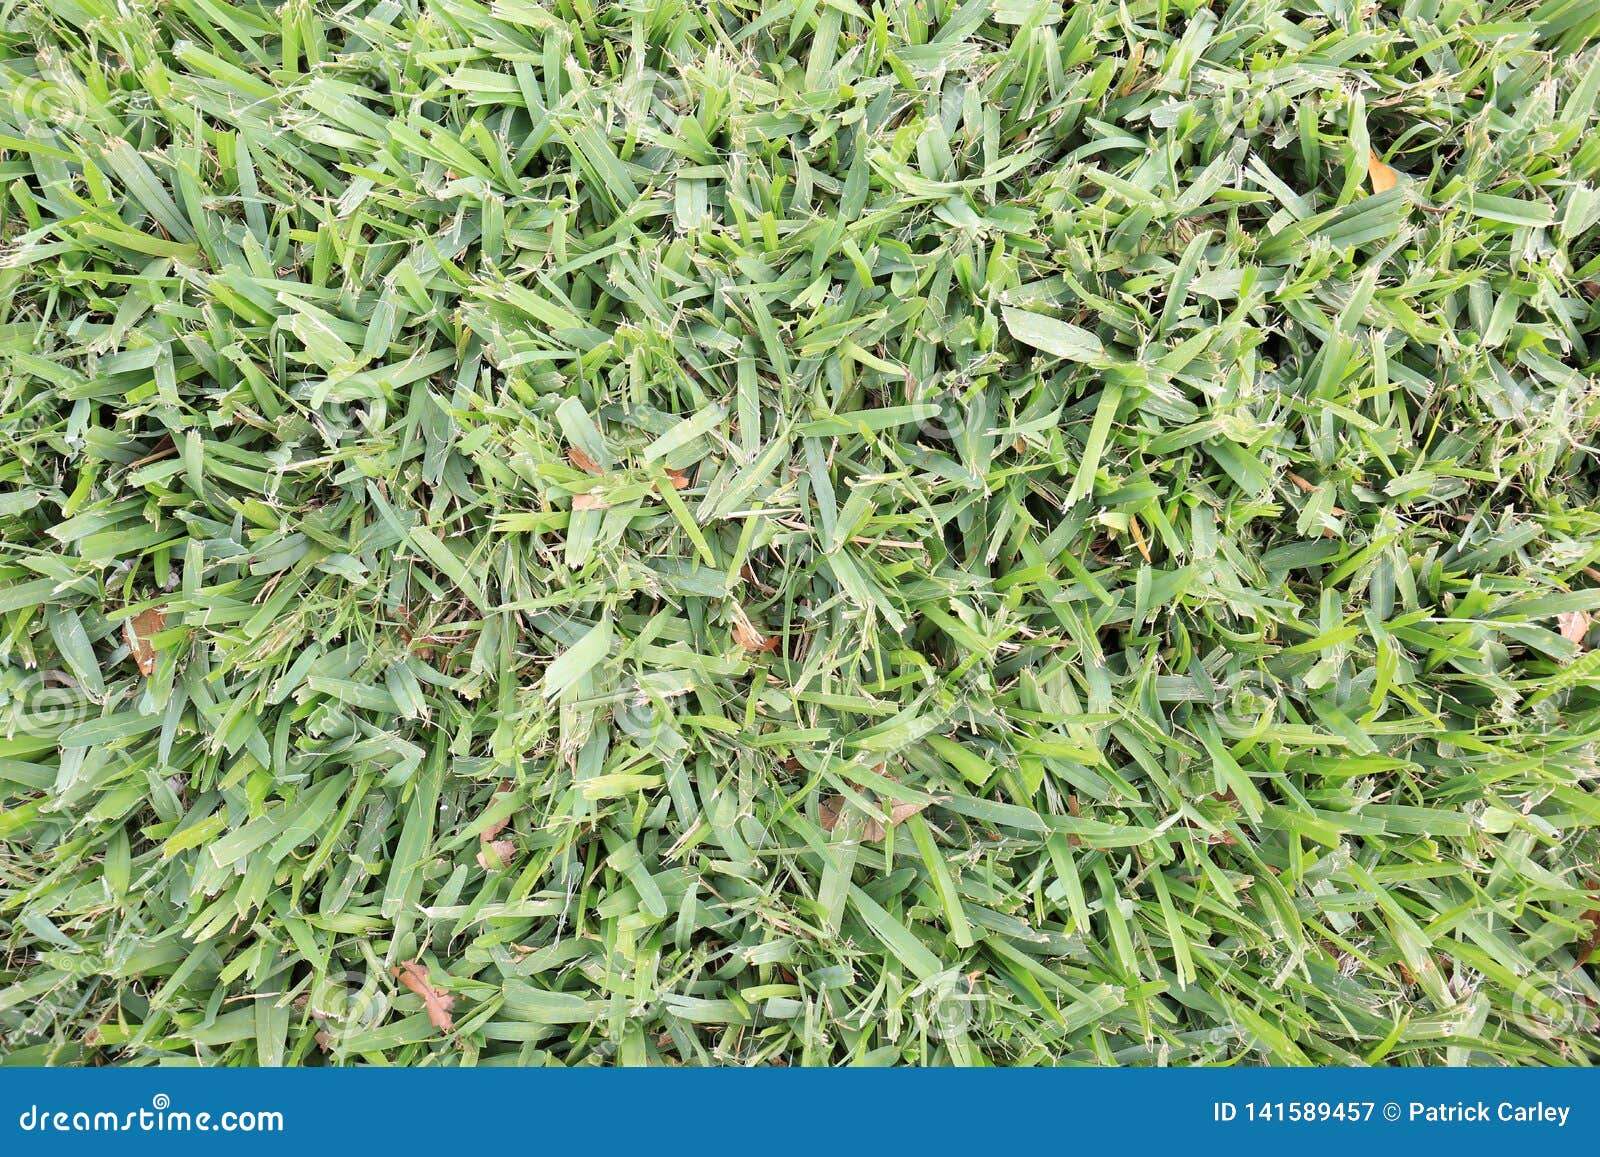 Closeup of Freshly Mowed Green Grass Lawn Background Stock Image